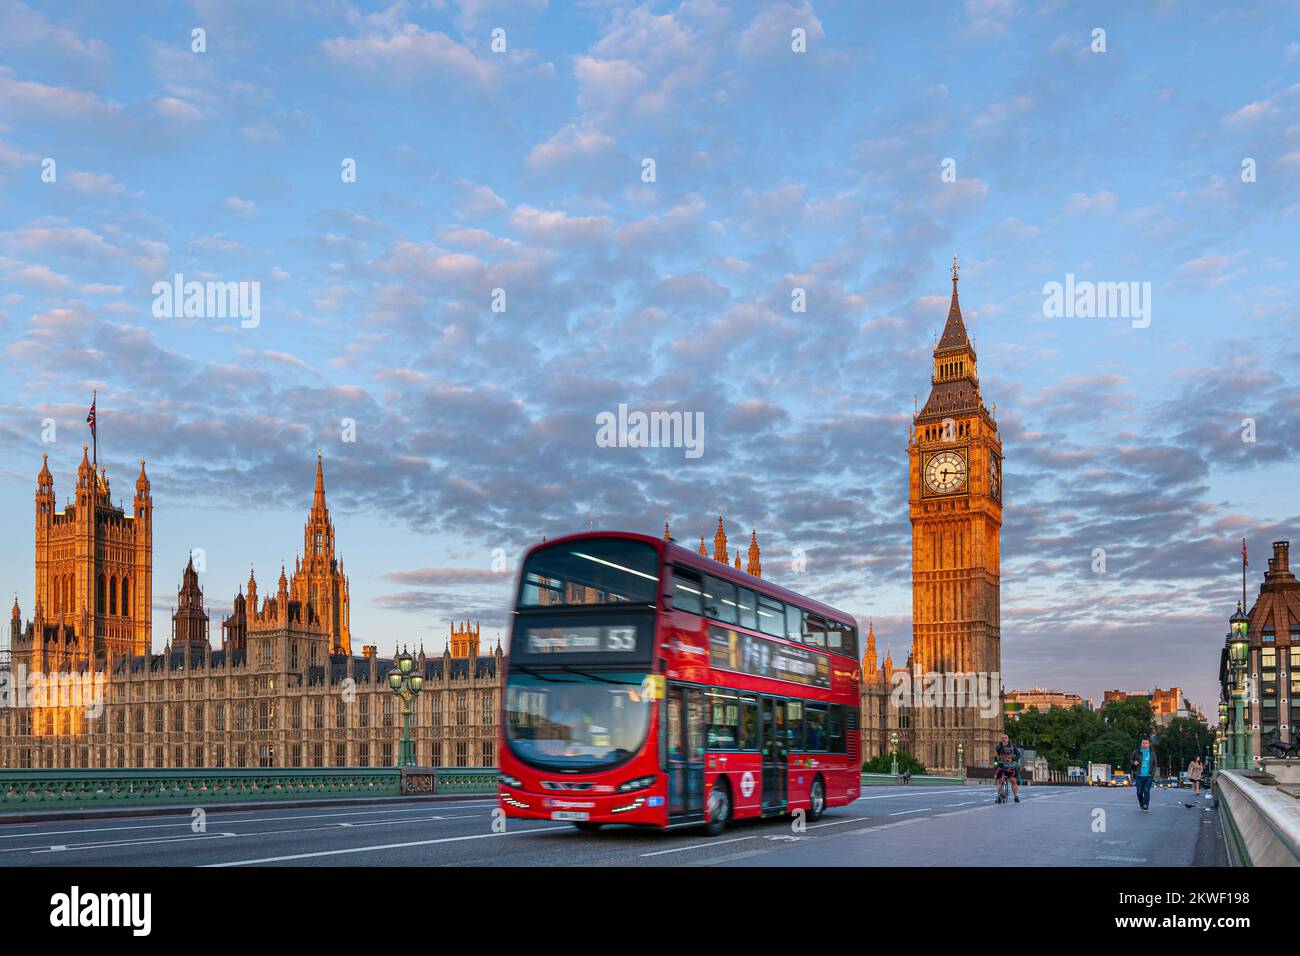 Westminster Palace, houses of parliament, London England. Stock Photo